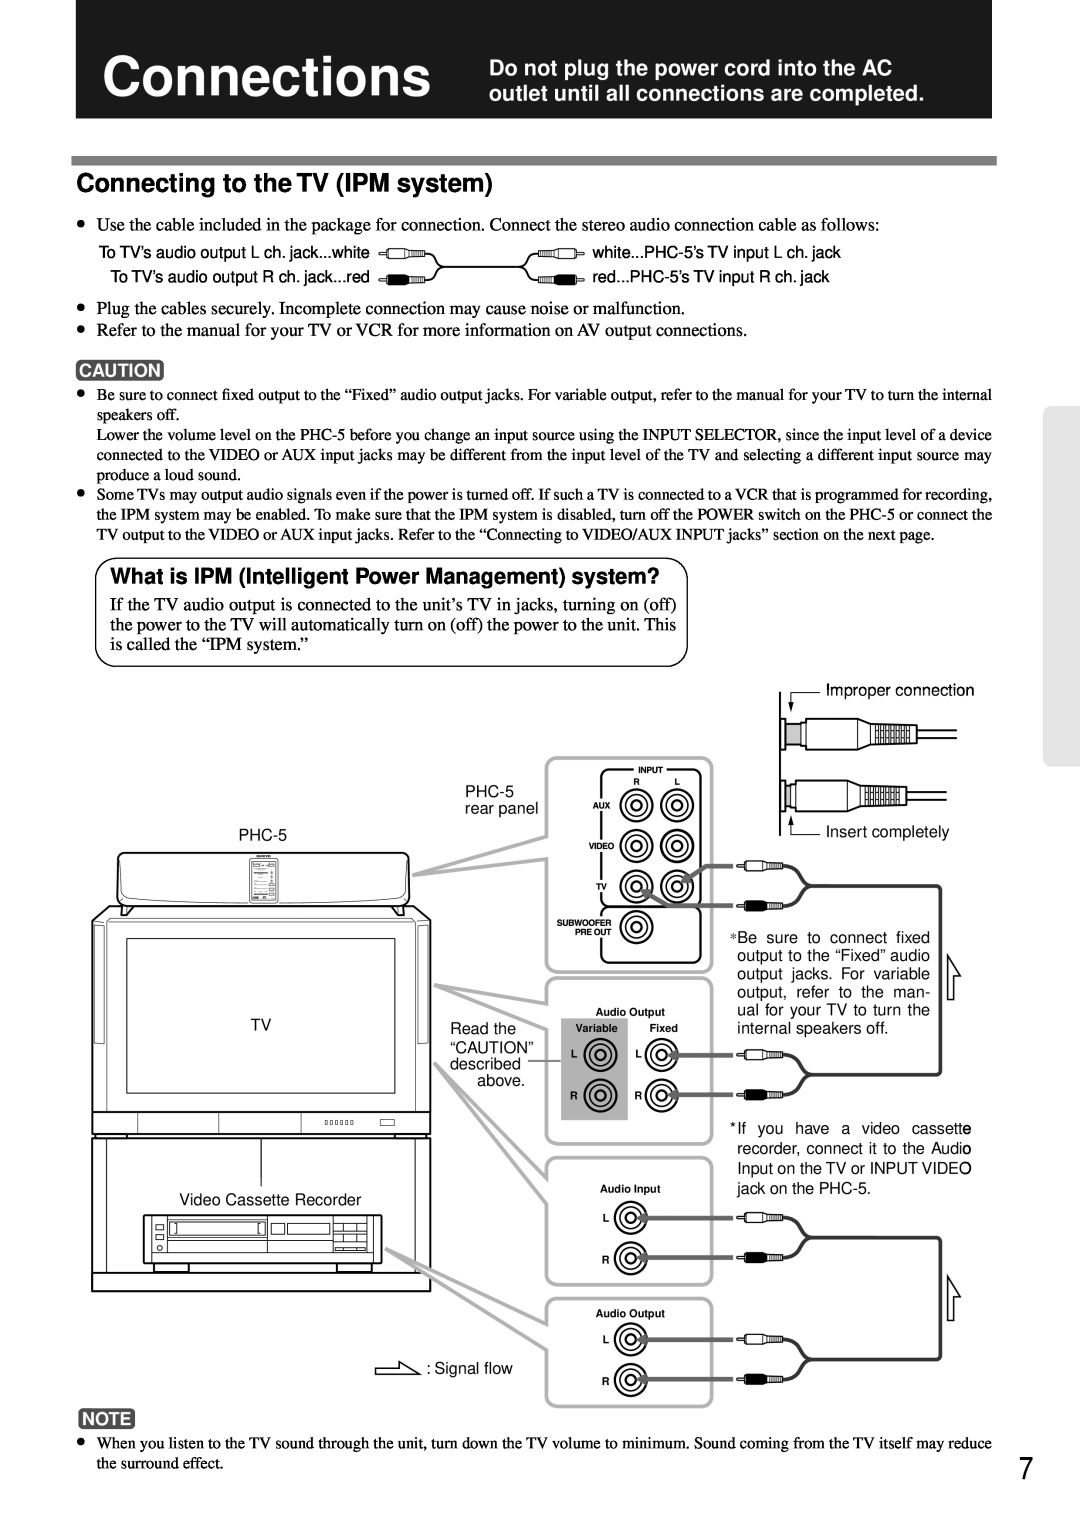 Onkyo PHC-5 instruction manual Connecting to the TV IPM system, What is IPM Intelligent Power Management system? 